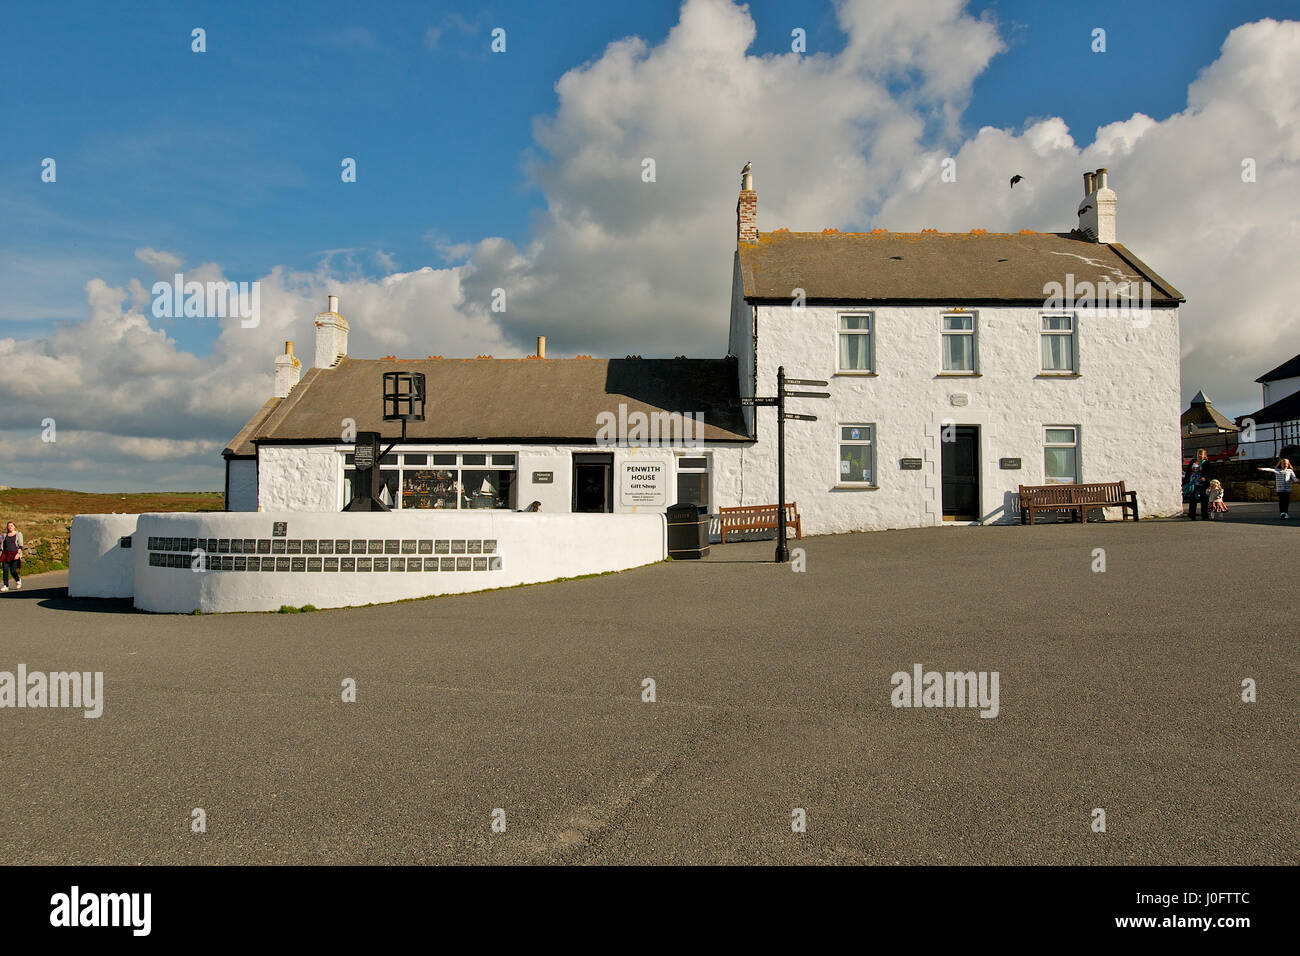 Penwith casa a Lands End, Cornwall, Inghilterra Foto Stock